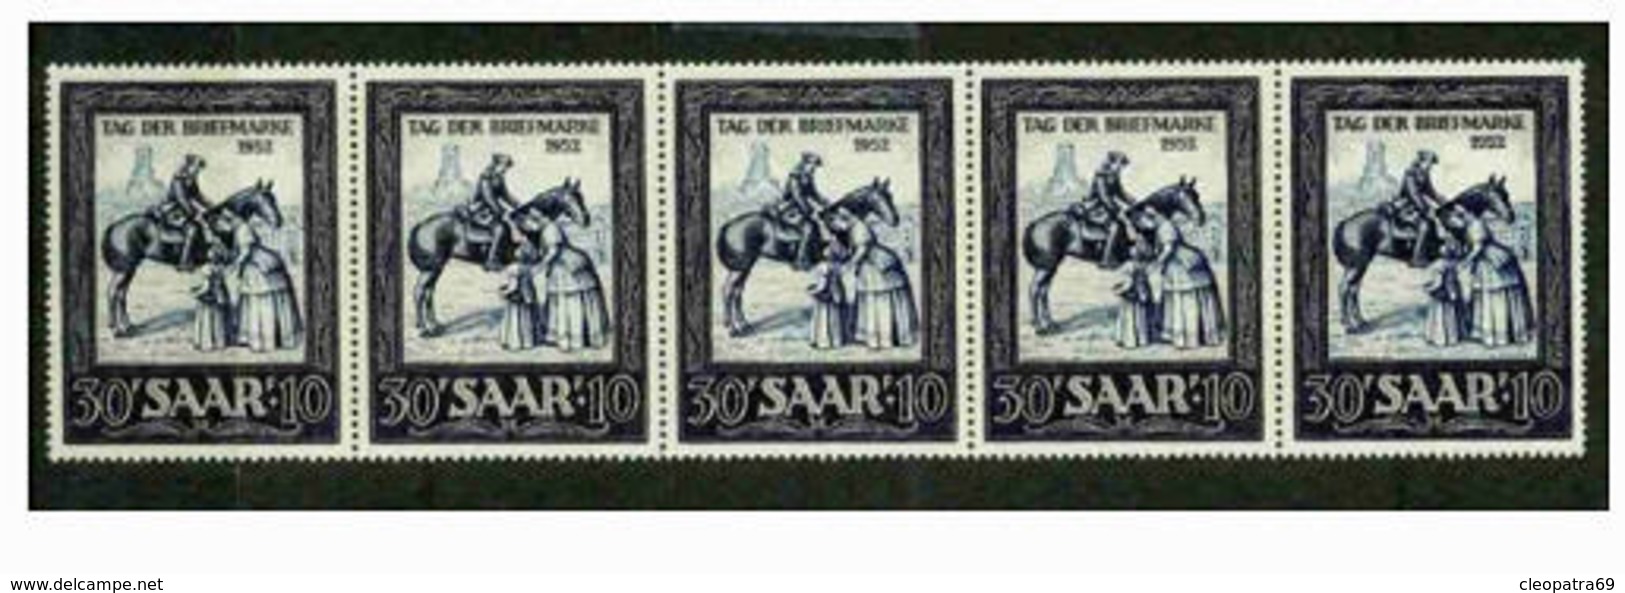 SAAR 1952 STRIP OF 5 STAMP ON STAMP STAMPDAY MNH  HORSE S11869-1 - Stamps On Stamps